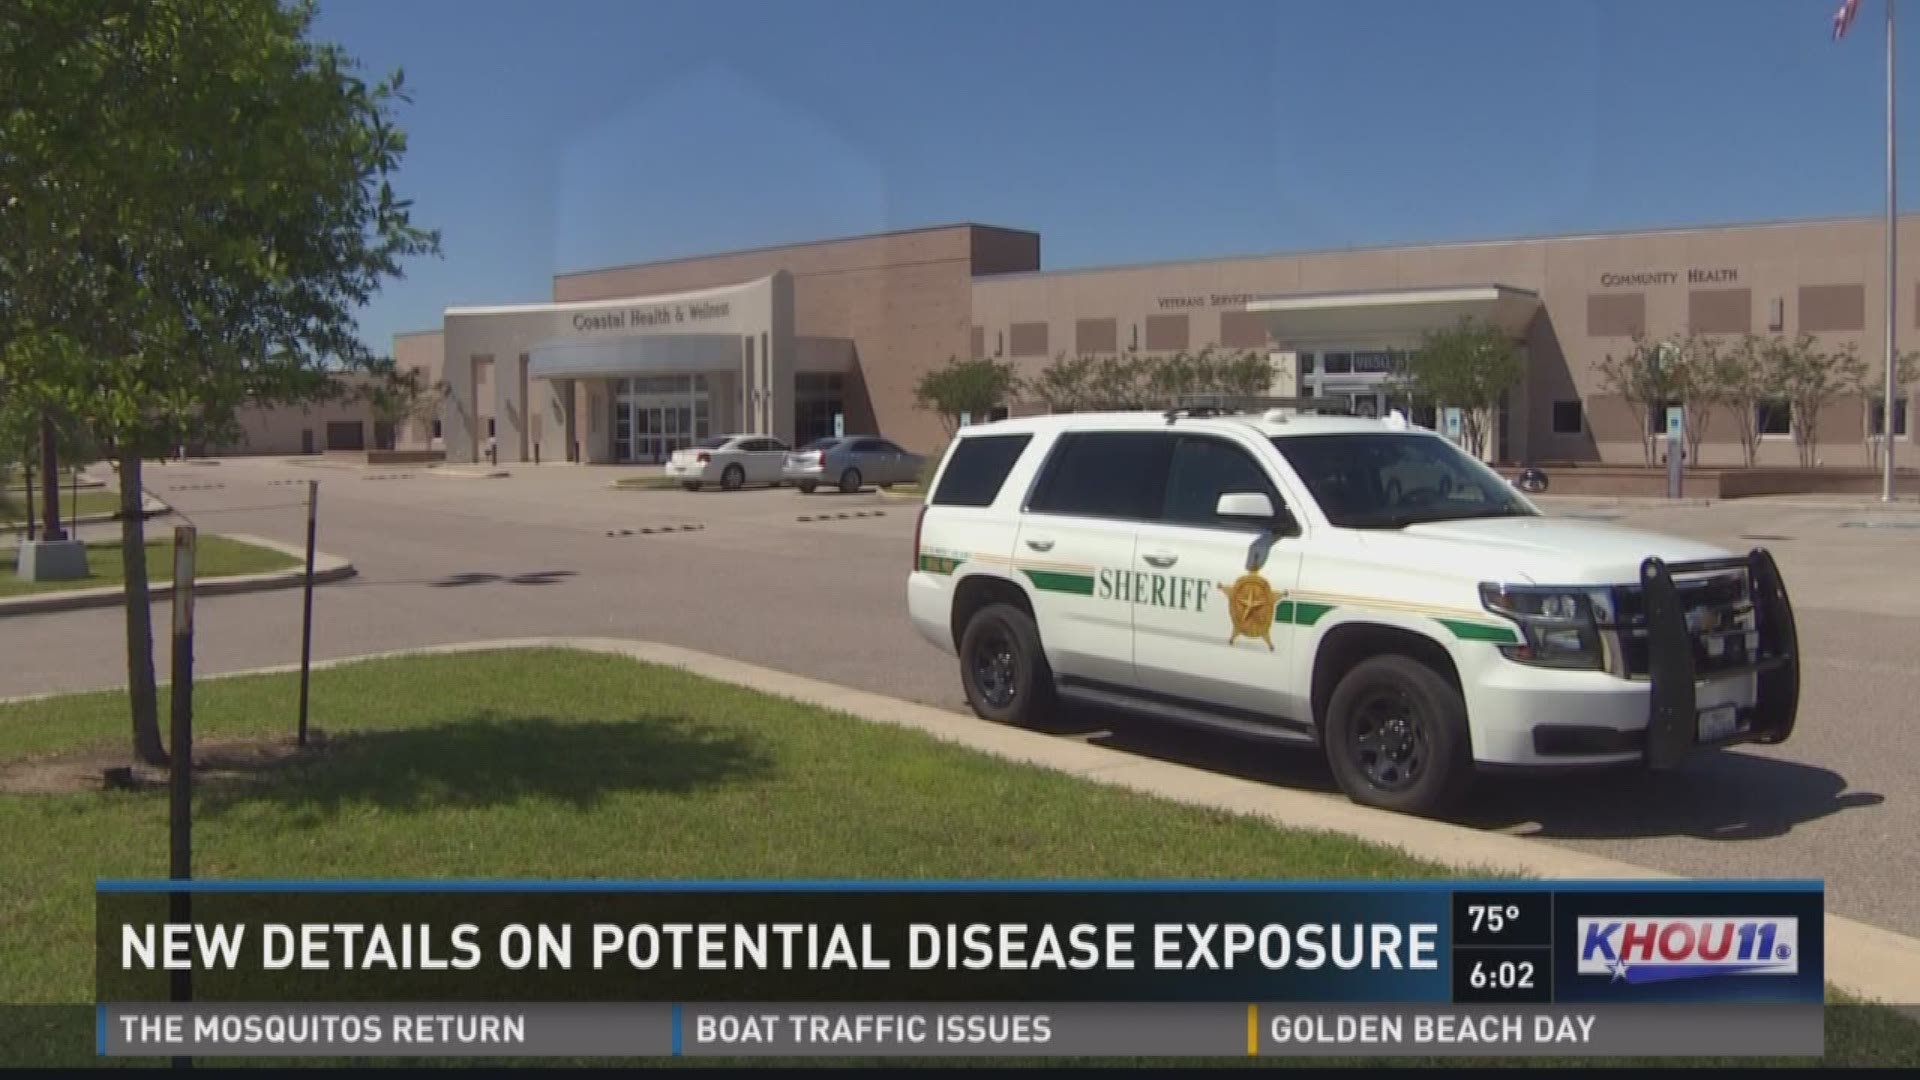 The Galveston County Health Authority released new details Friday regarding a health scare of patients of Texas City's Coastal Health and Wellness where 9,500 patients may have been exposed to Hepatitis C, B and HIV.